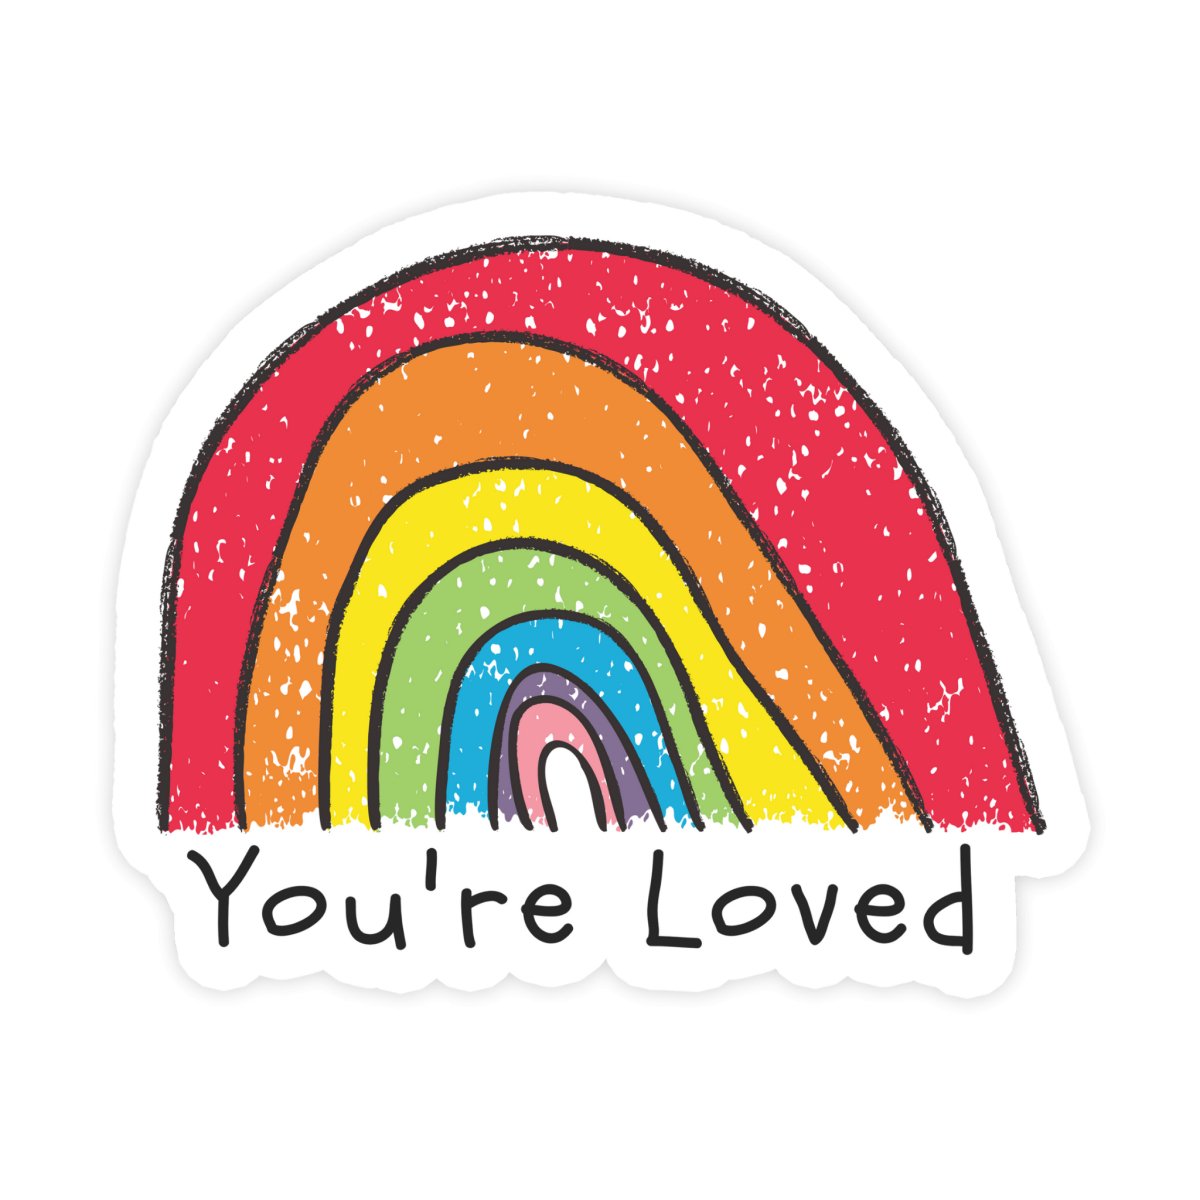 You're Loved Rainbow Mental Health Sticker - stickerbullYou're Loved Rainbow Mental Health StickerRetail StickerstickerbullstickerbullTaylor_YourLovedYou're Loved Rainbow Mental Health Sticker